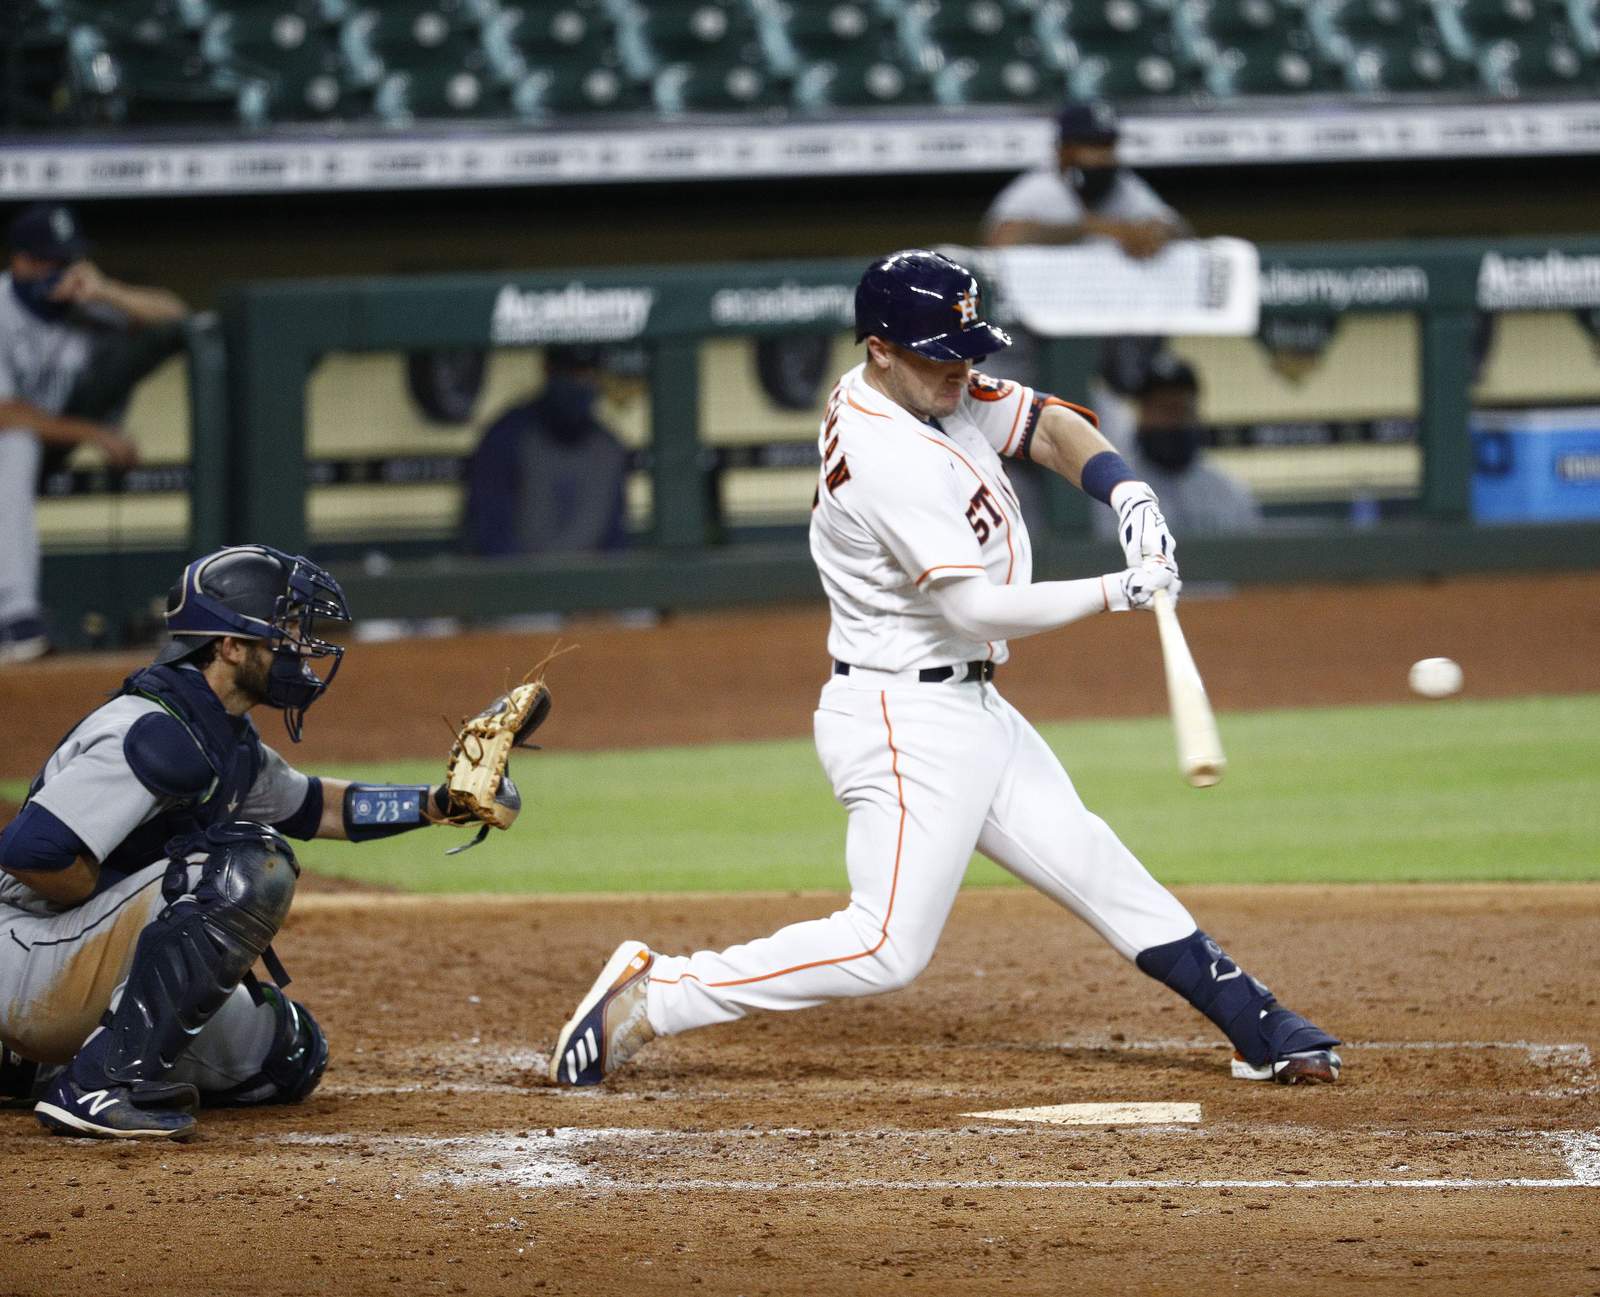 Alex Bregman’s 100th career home run Monday night was exactly 100 mph, MLB official says